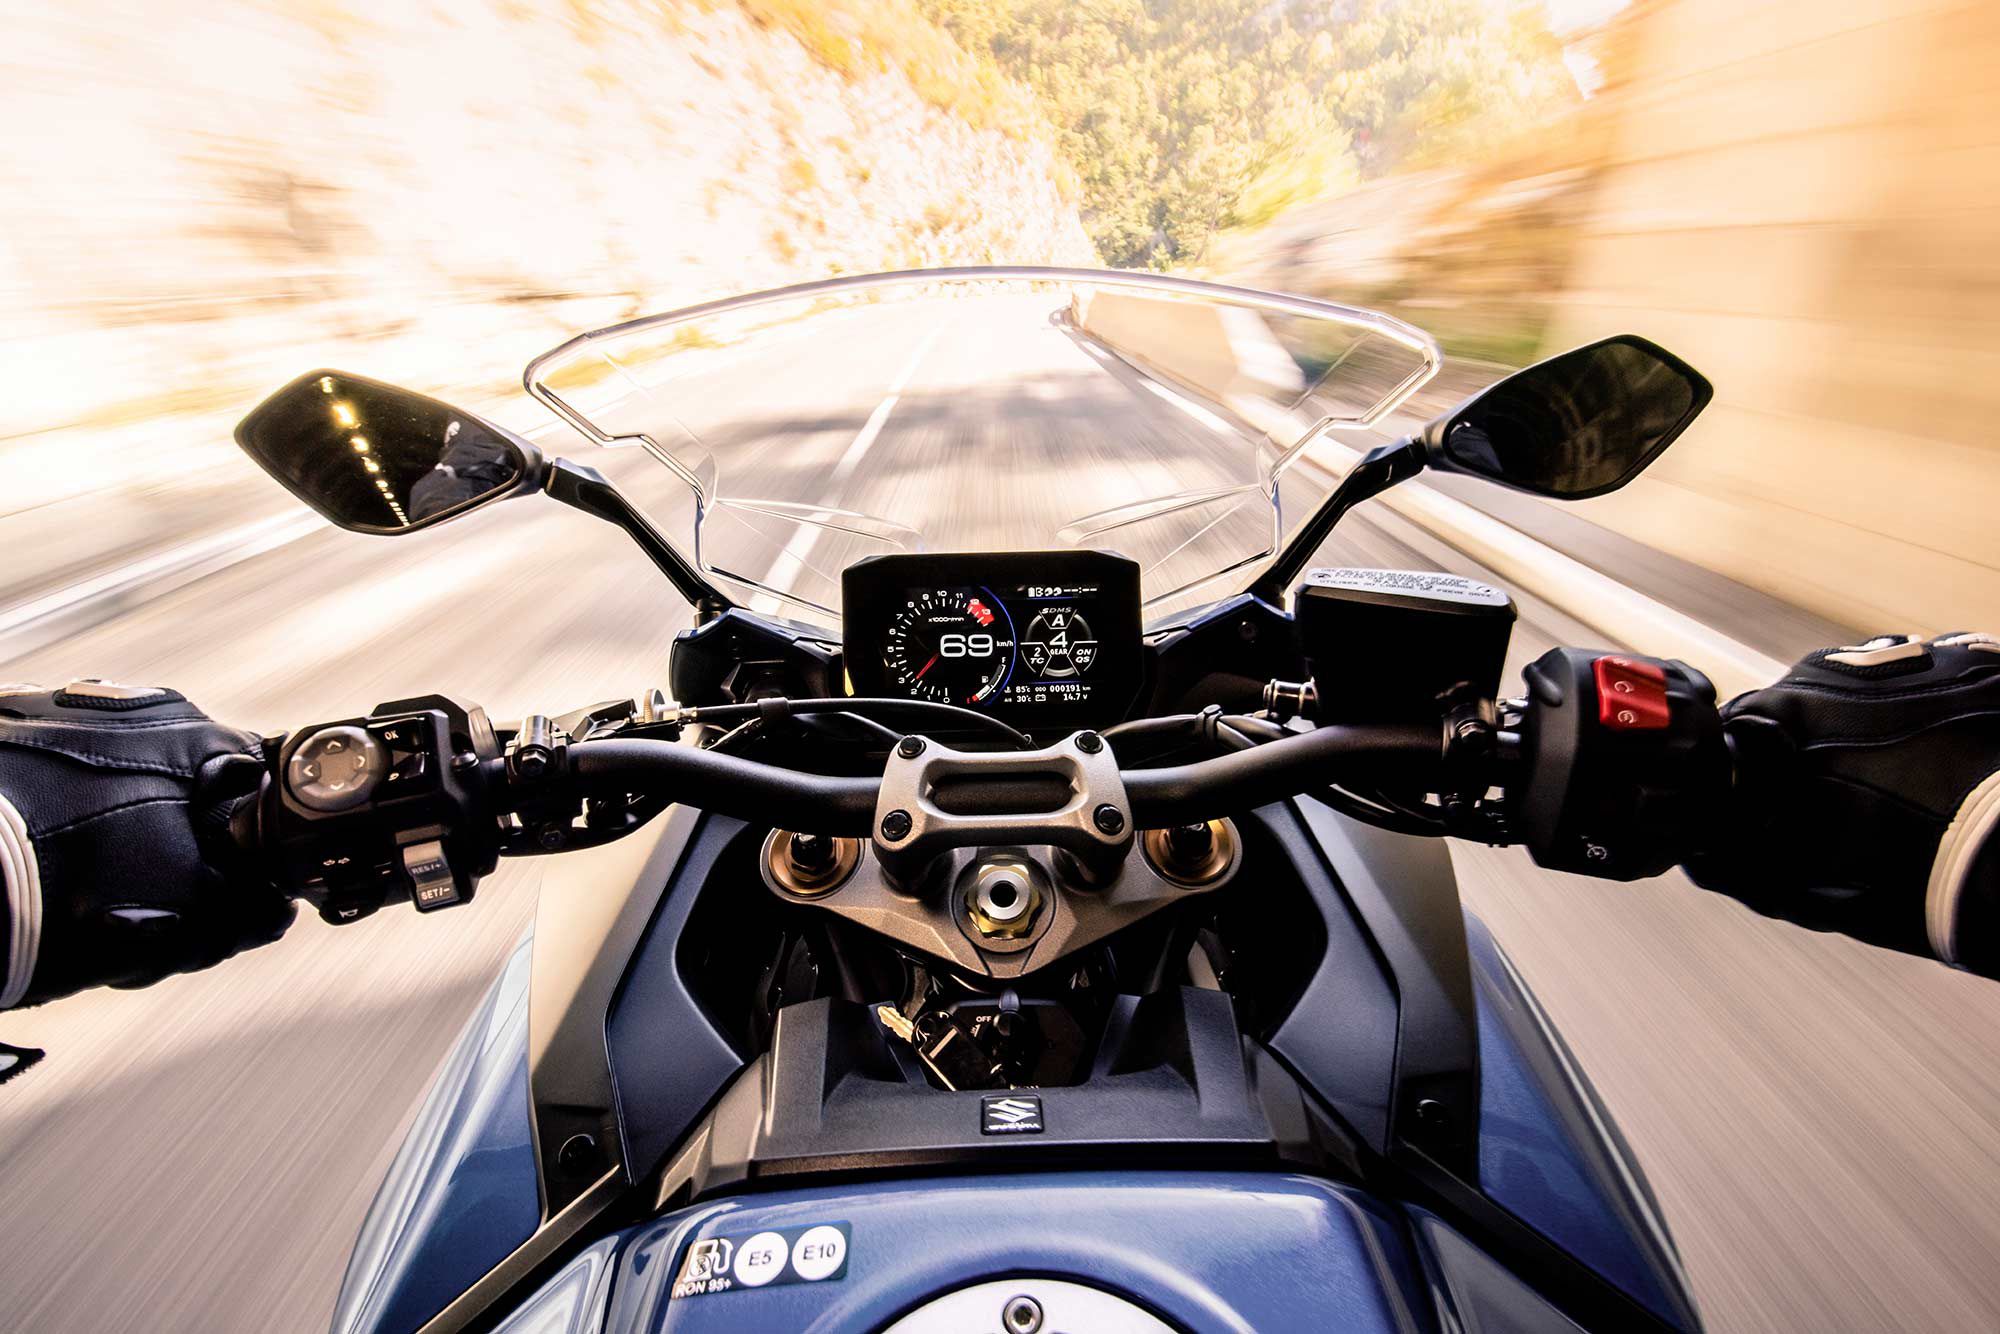 A new 6.5-inch TFT display provides all the bike and ride information.